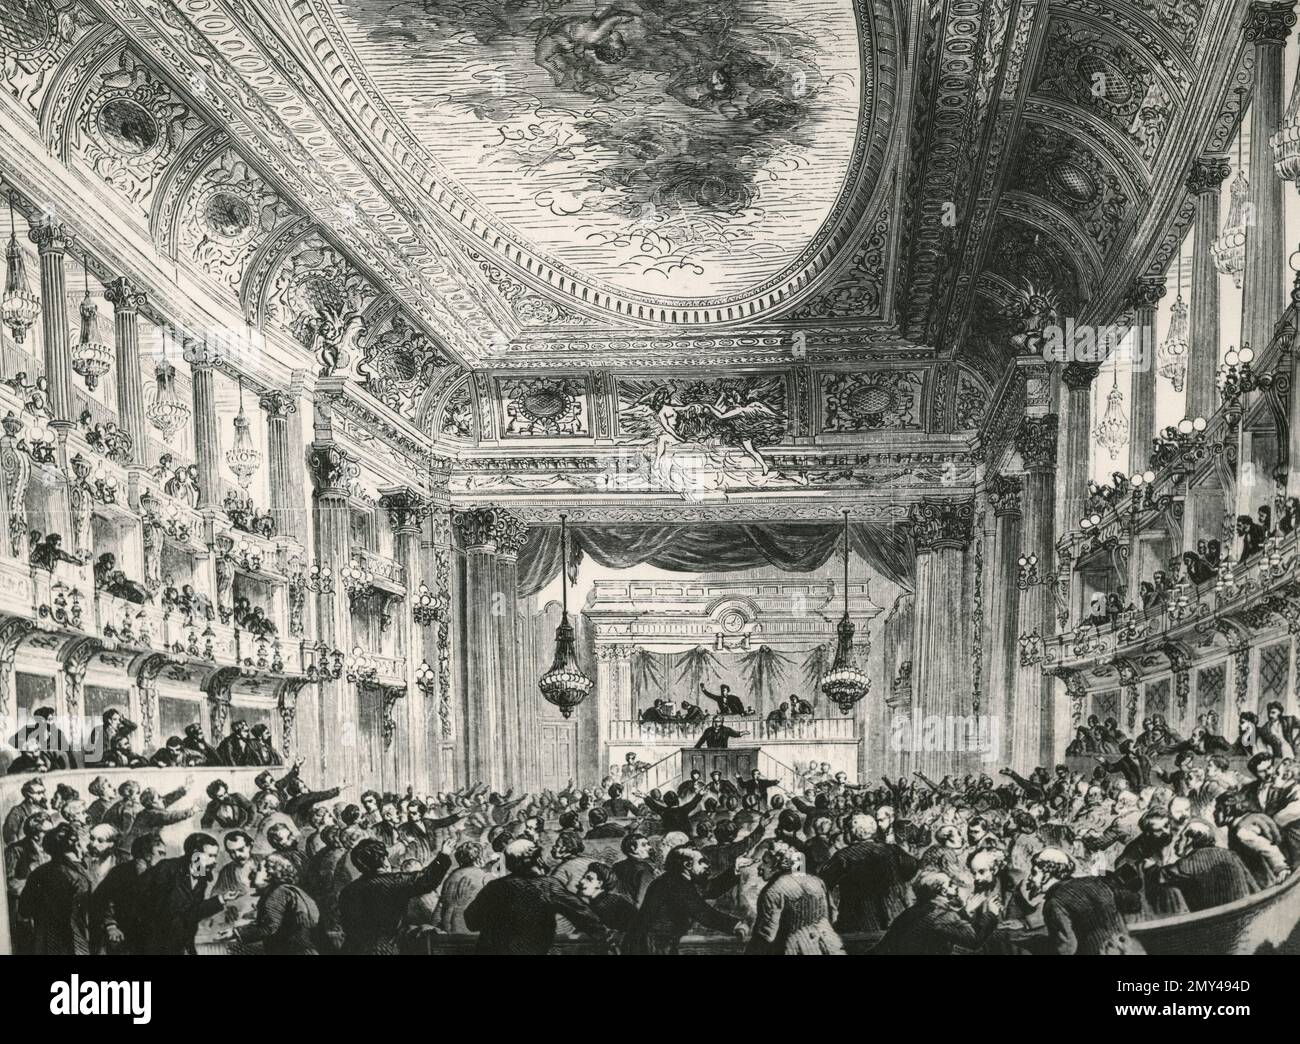 French National Assembly in Versailles, France 1800s, illustration